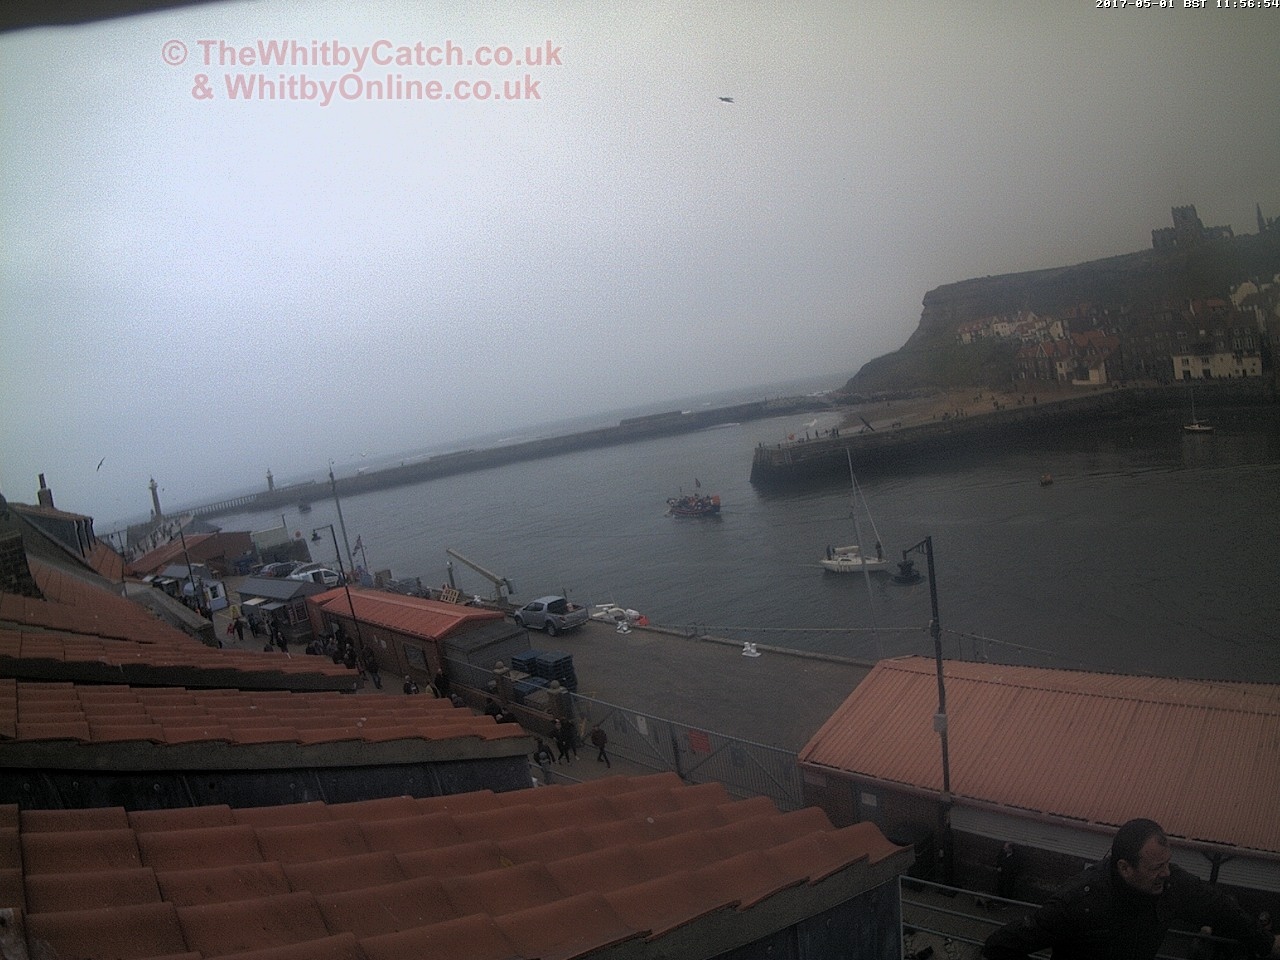 Whitby Mon 1st May 2017 11:57.